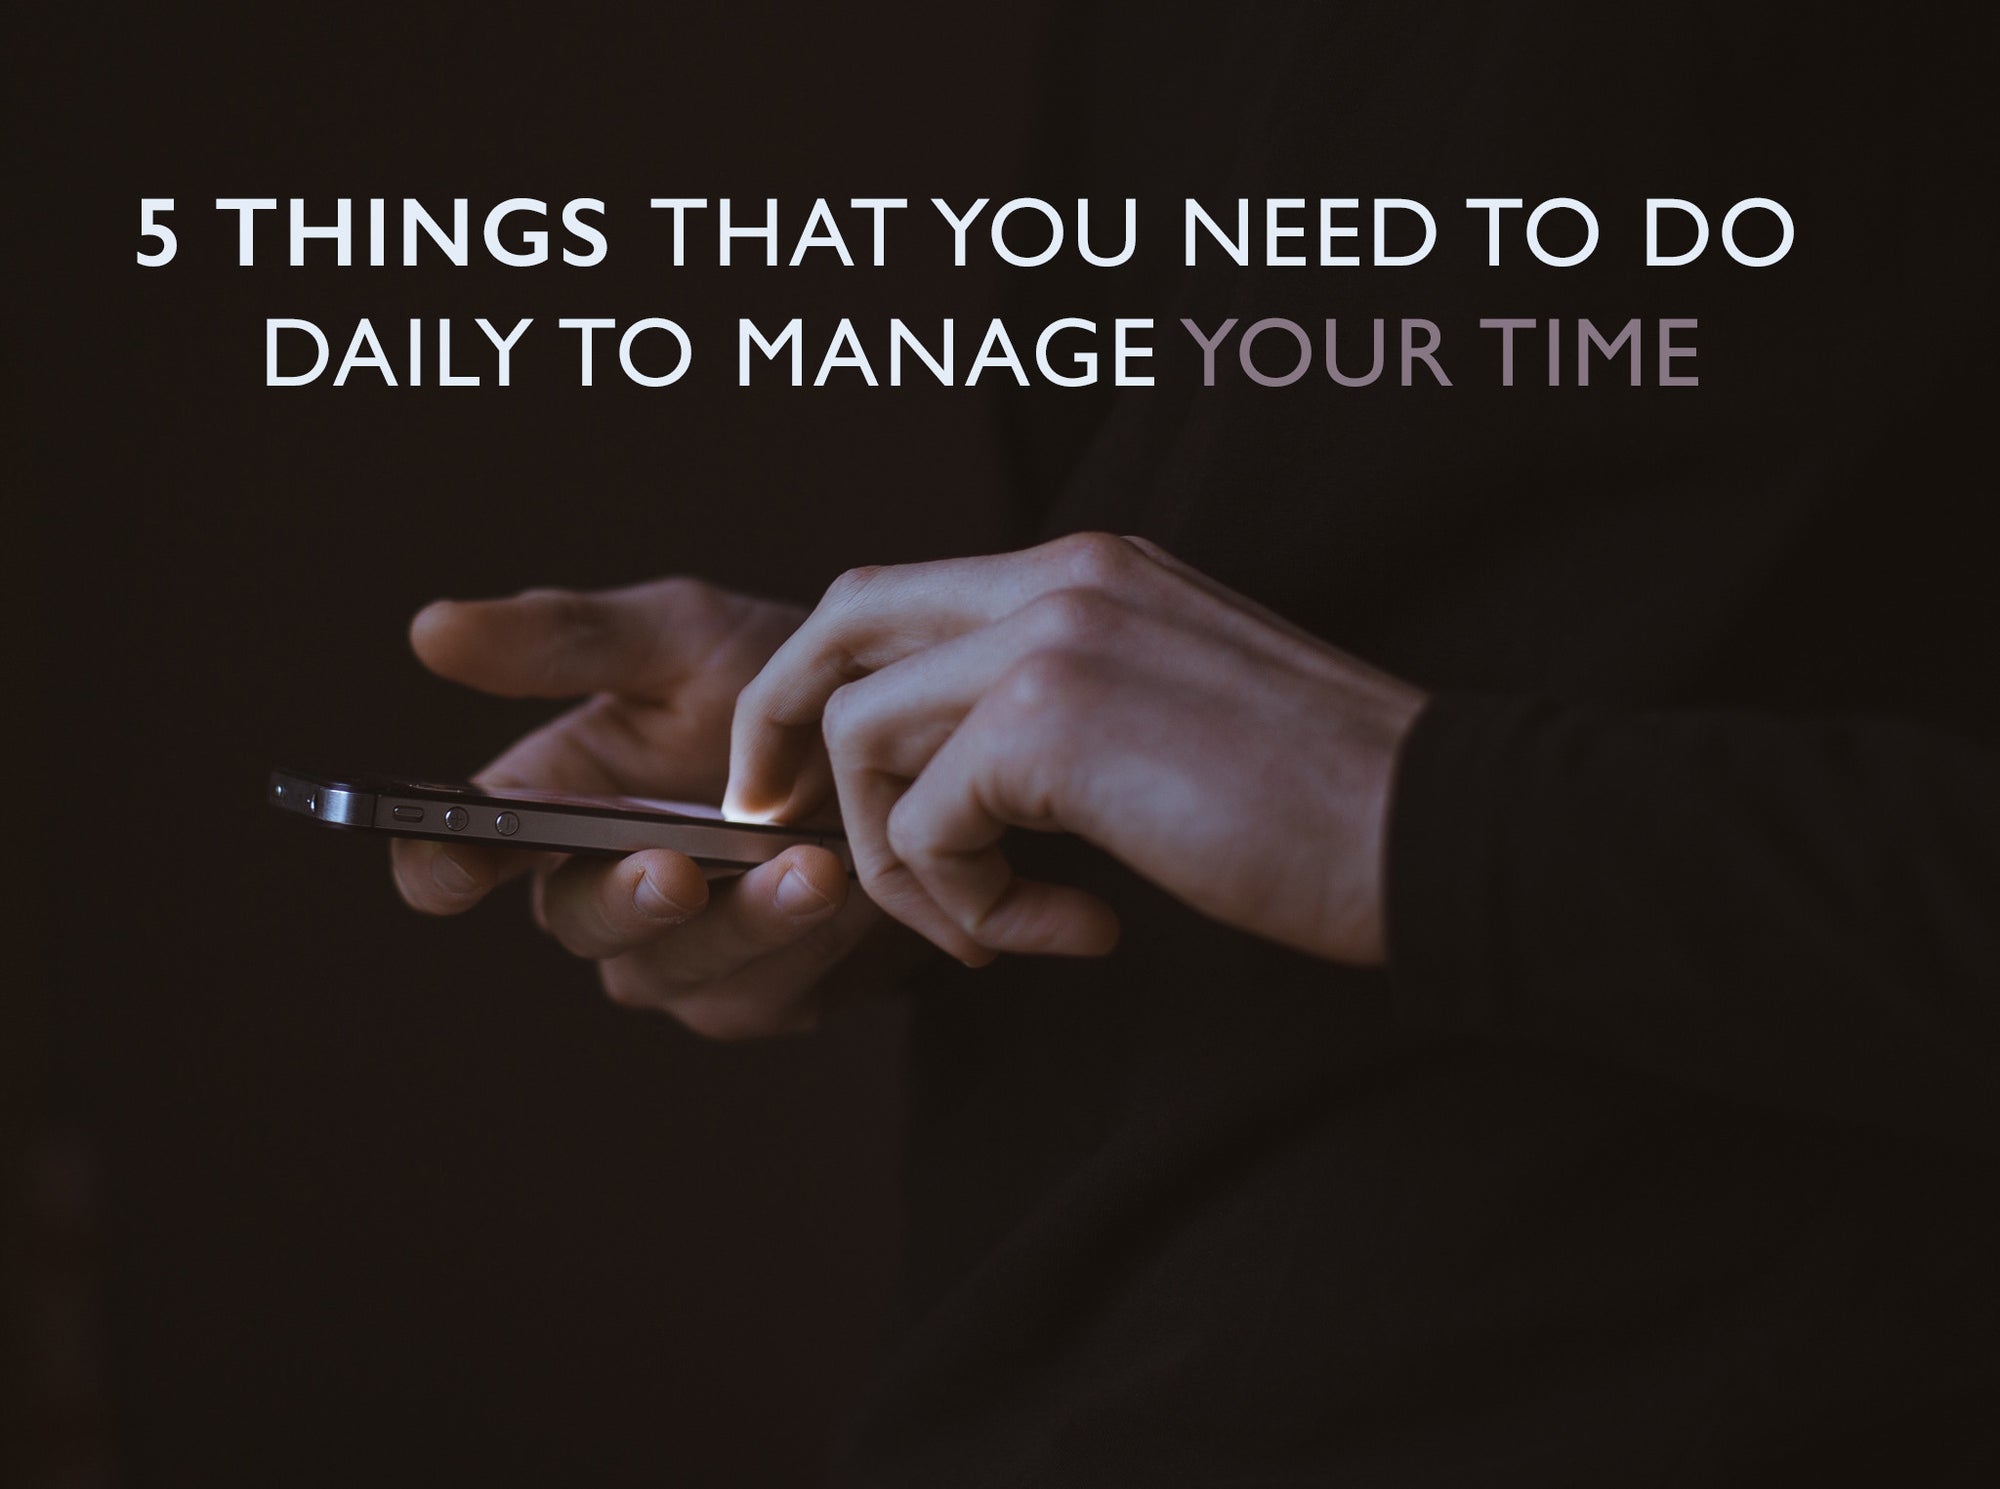 5 Things That You Need to Do Daily to Manage Your Time